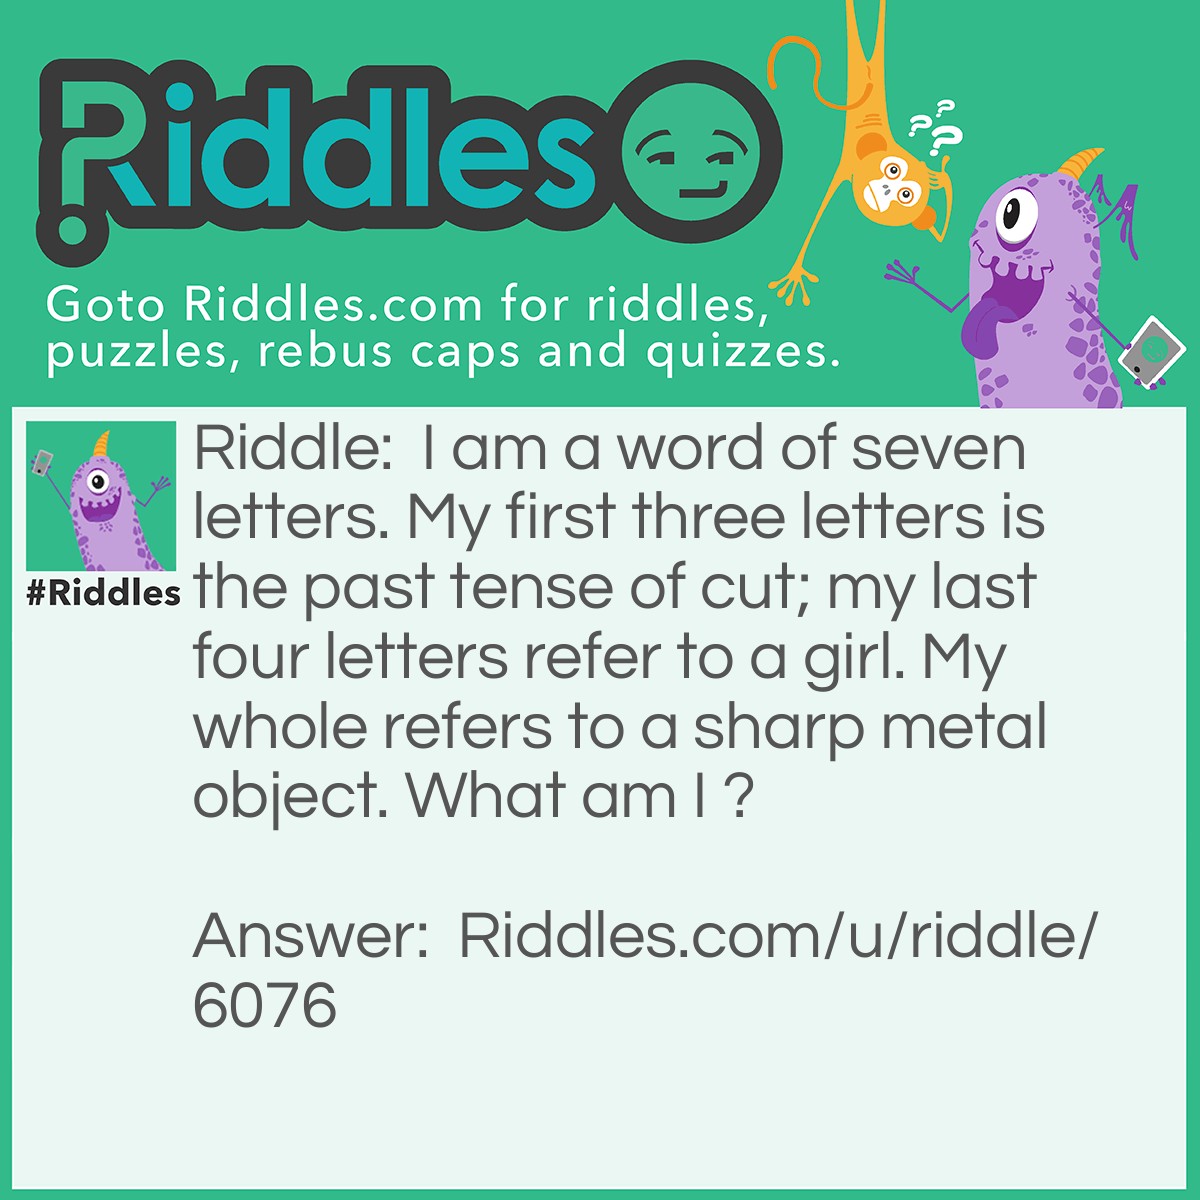 Riddle: I am a word of seven letters. My first three letters is the past tense of cut; my last four letters refer to a girl. My whole refers to a sharp metal object. What am I ? Answer: Cutlass. The little trick there is 'cut' which is the same present and past tense.